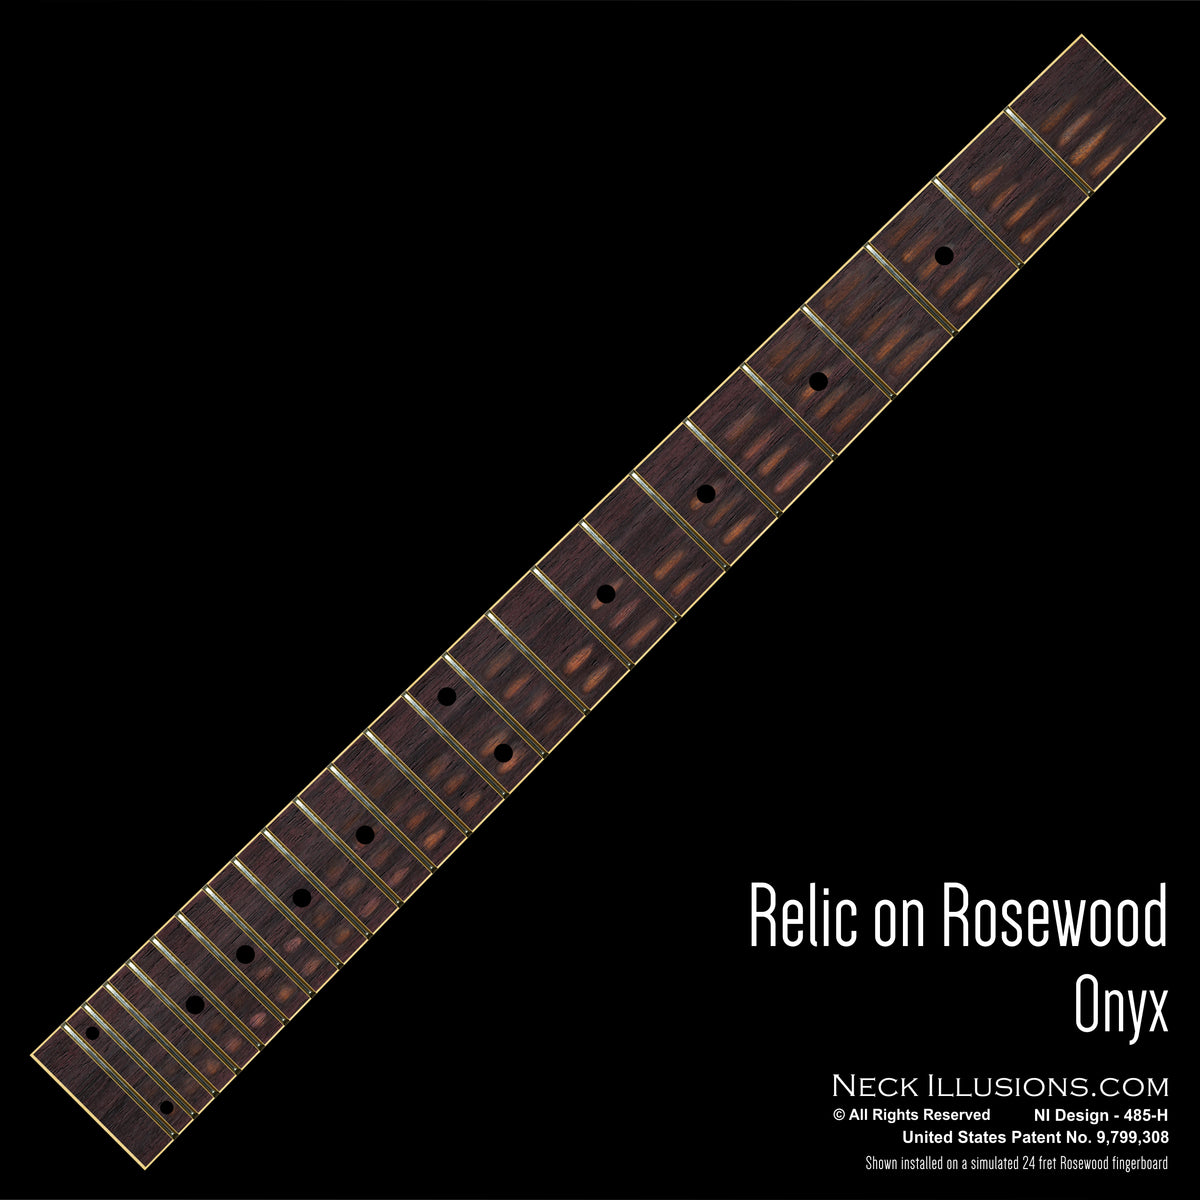 Relic on Rosewood